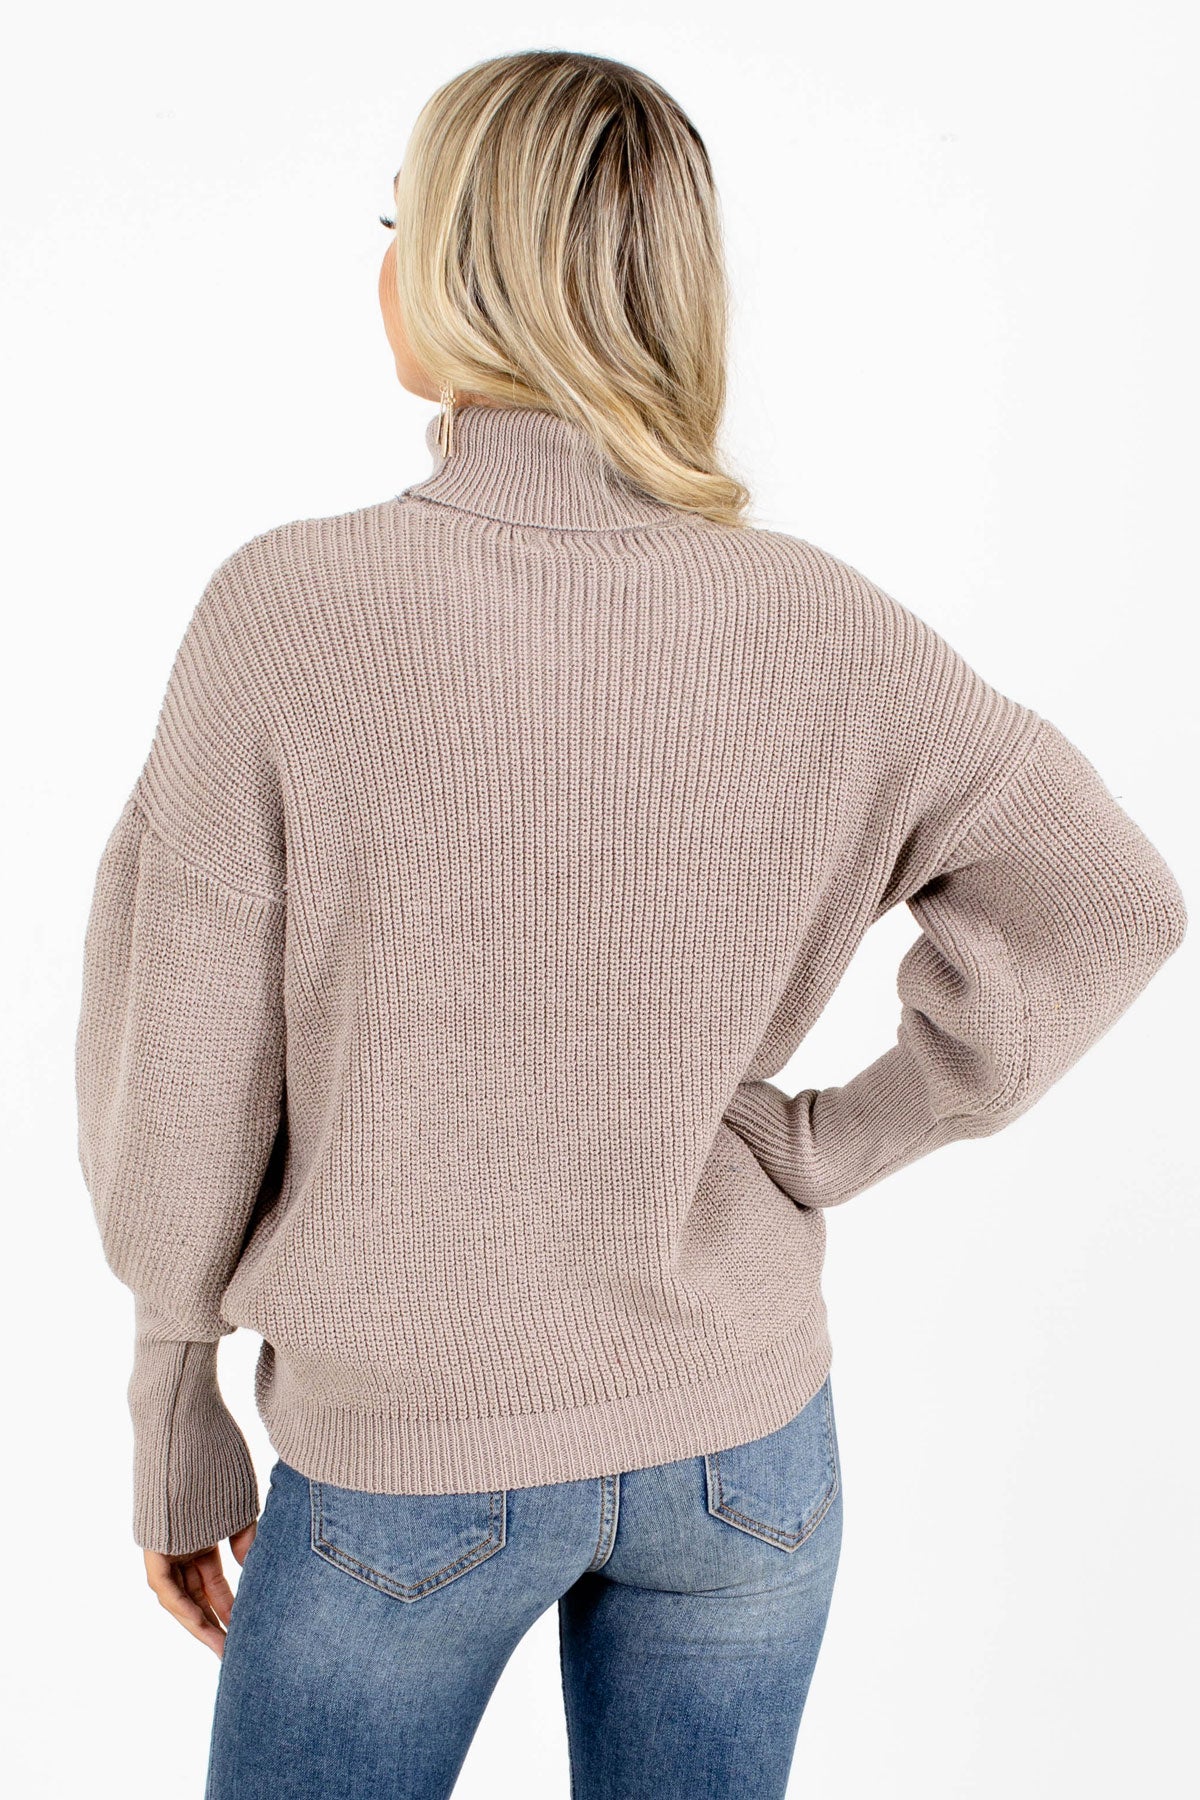 Brown High-Quality Knit Material Boutique Sweaters for Women